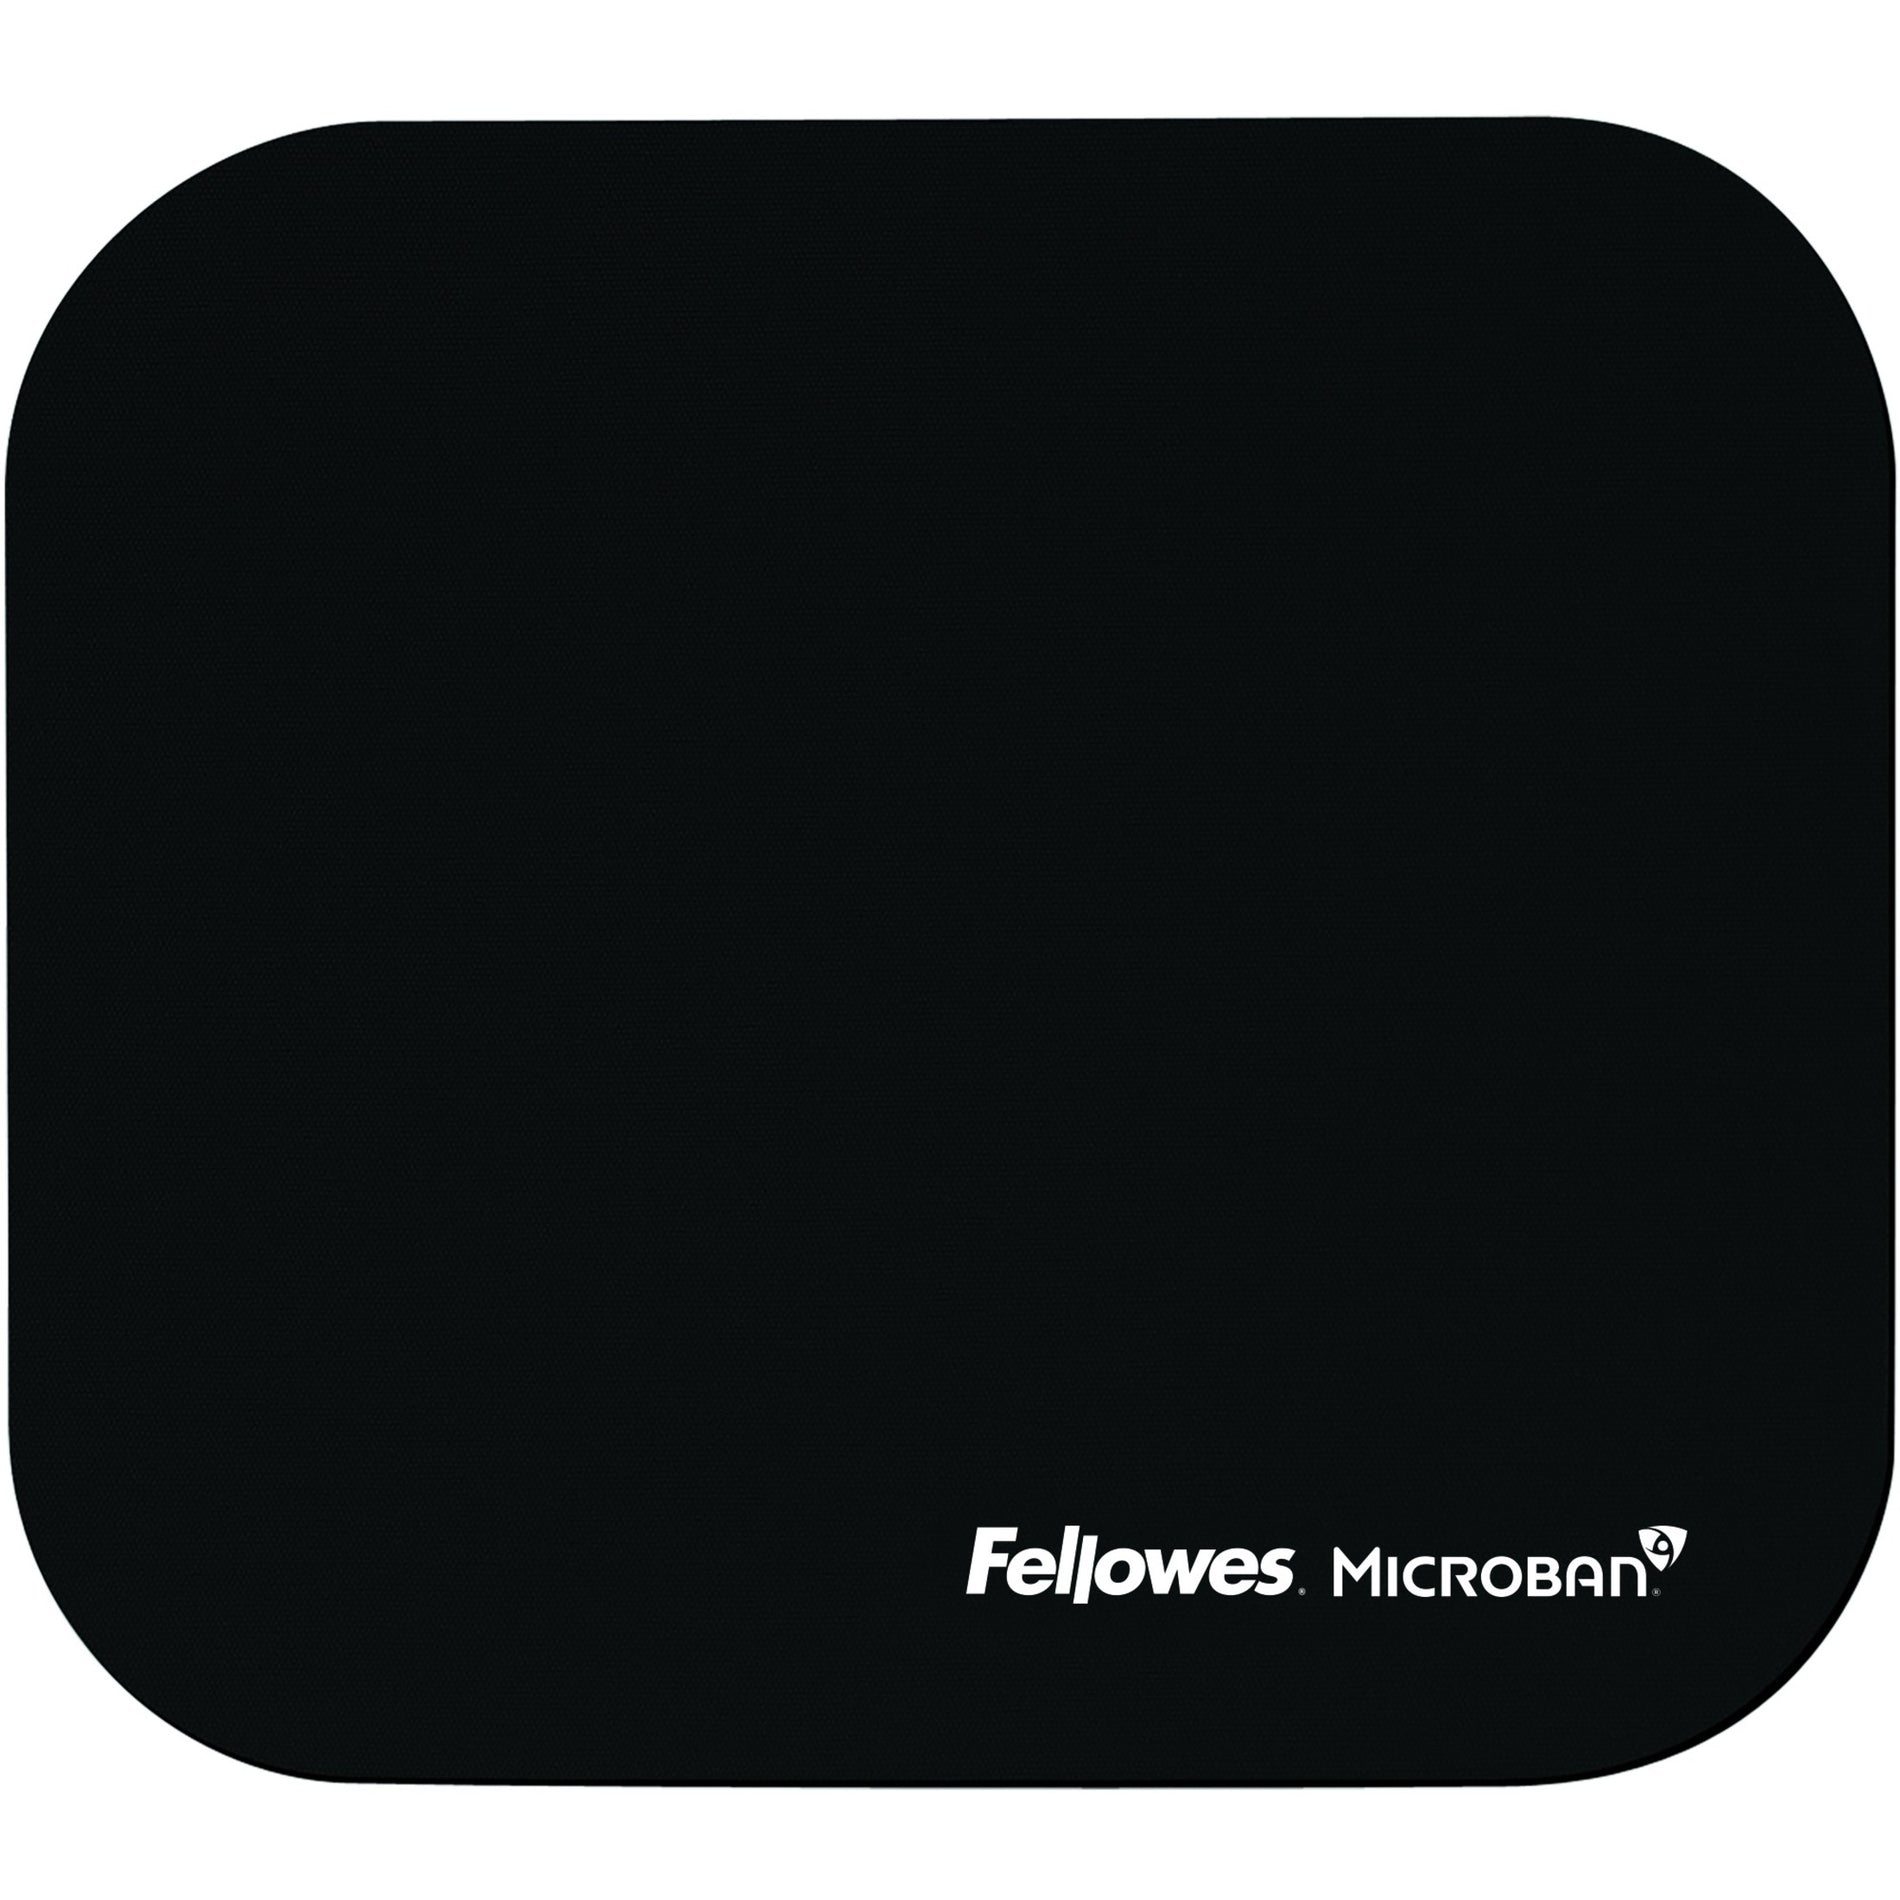 Fellowes 5933901 Microban Mouse Pad, Nonskid, Black, 9"x8"x1/8"